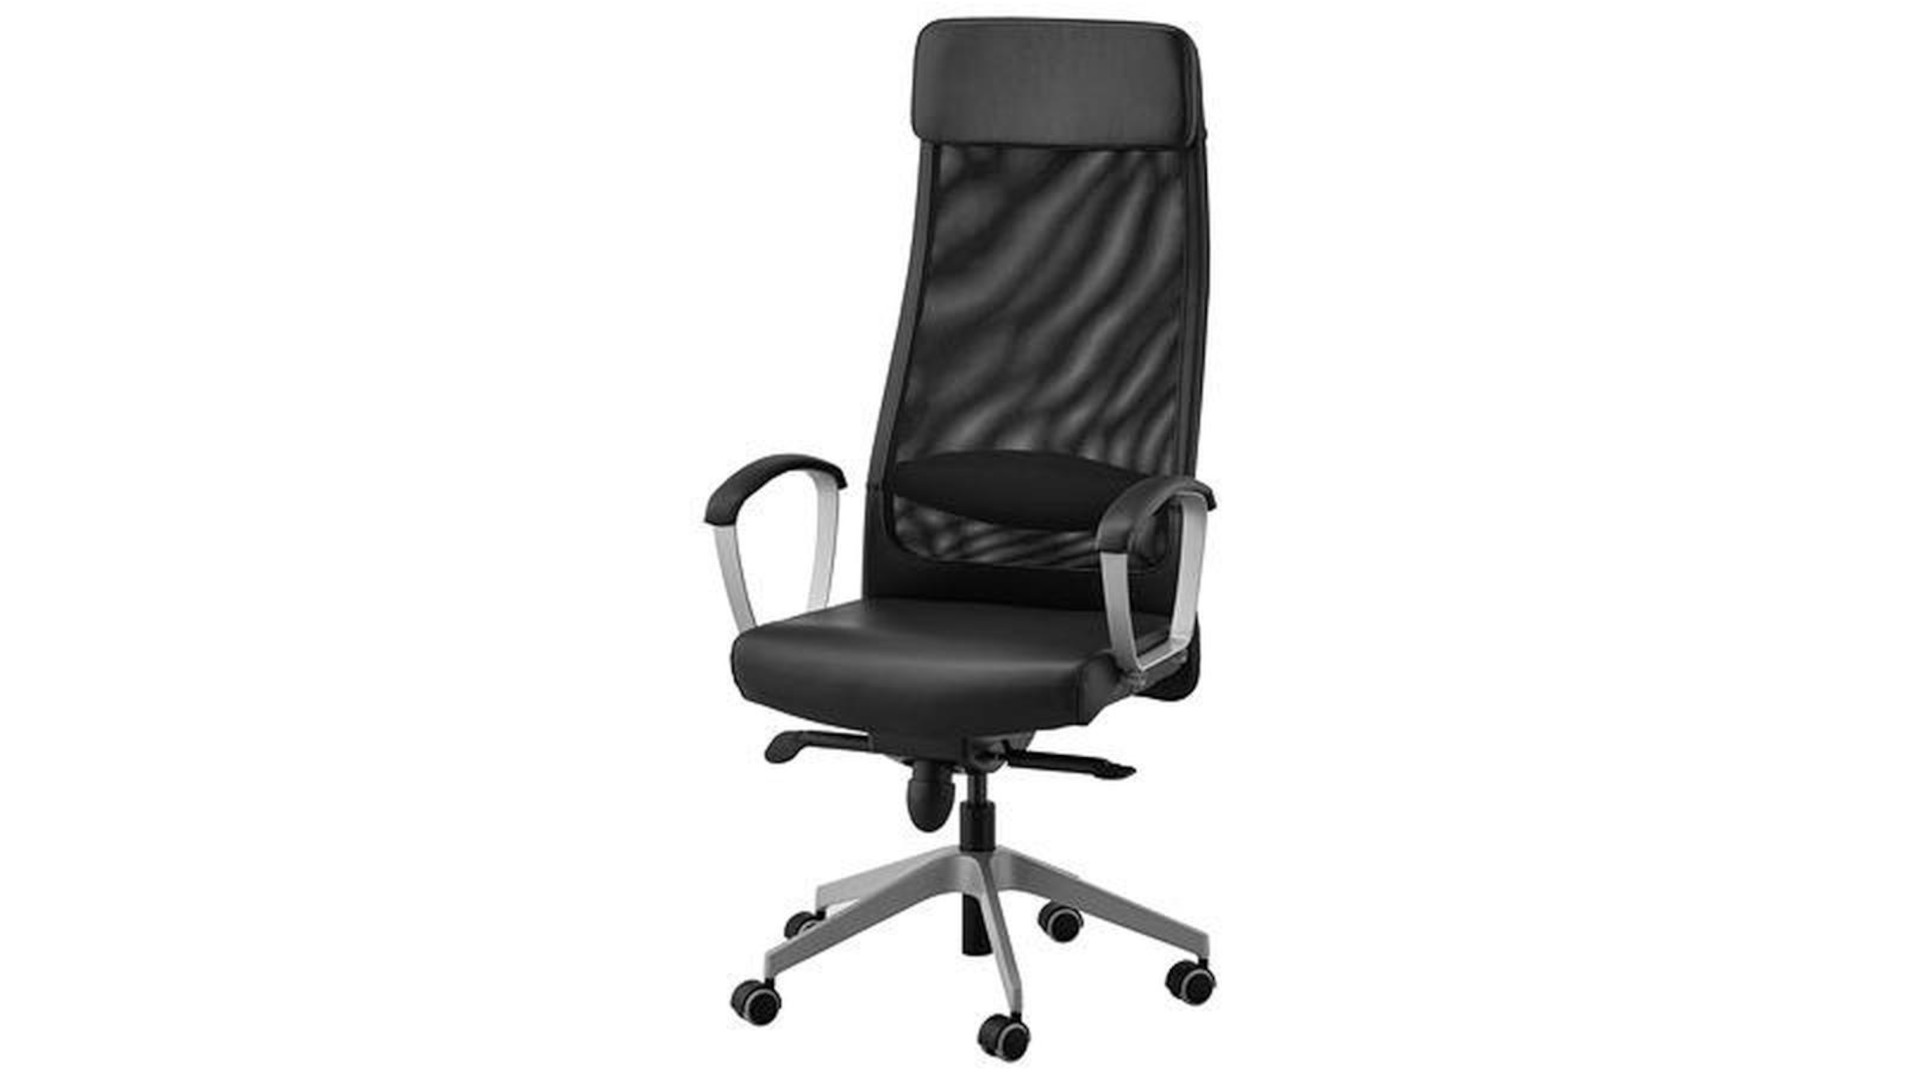 The Ikea Markus gaming chair